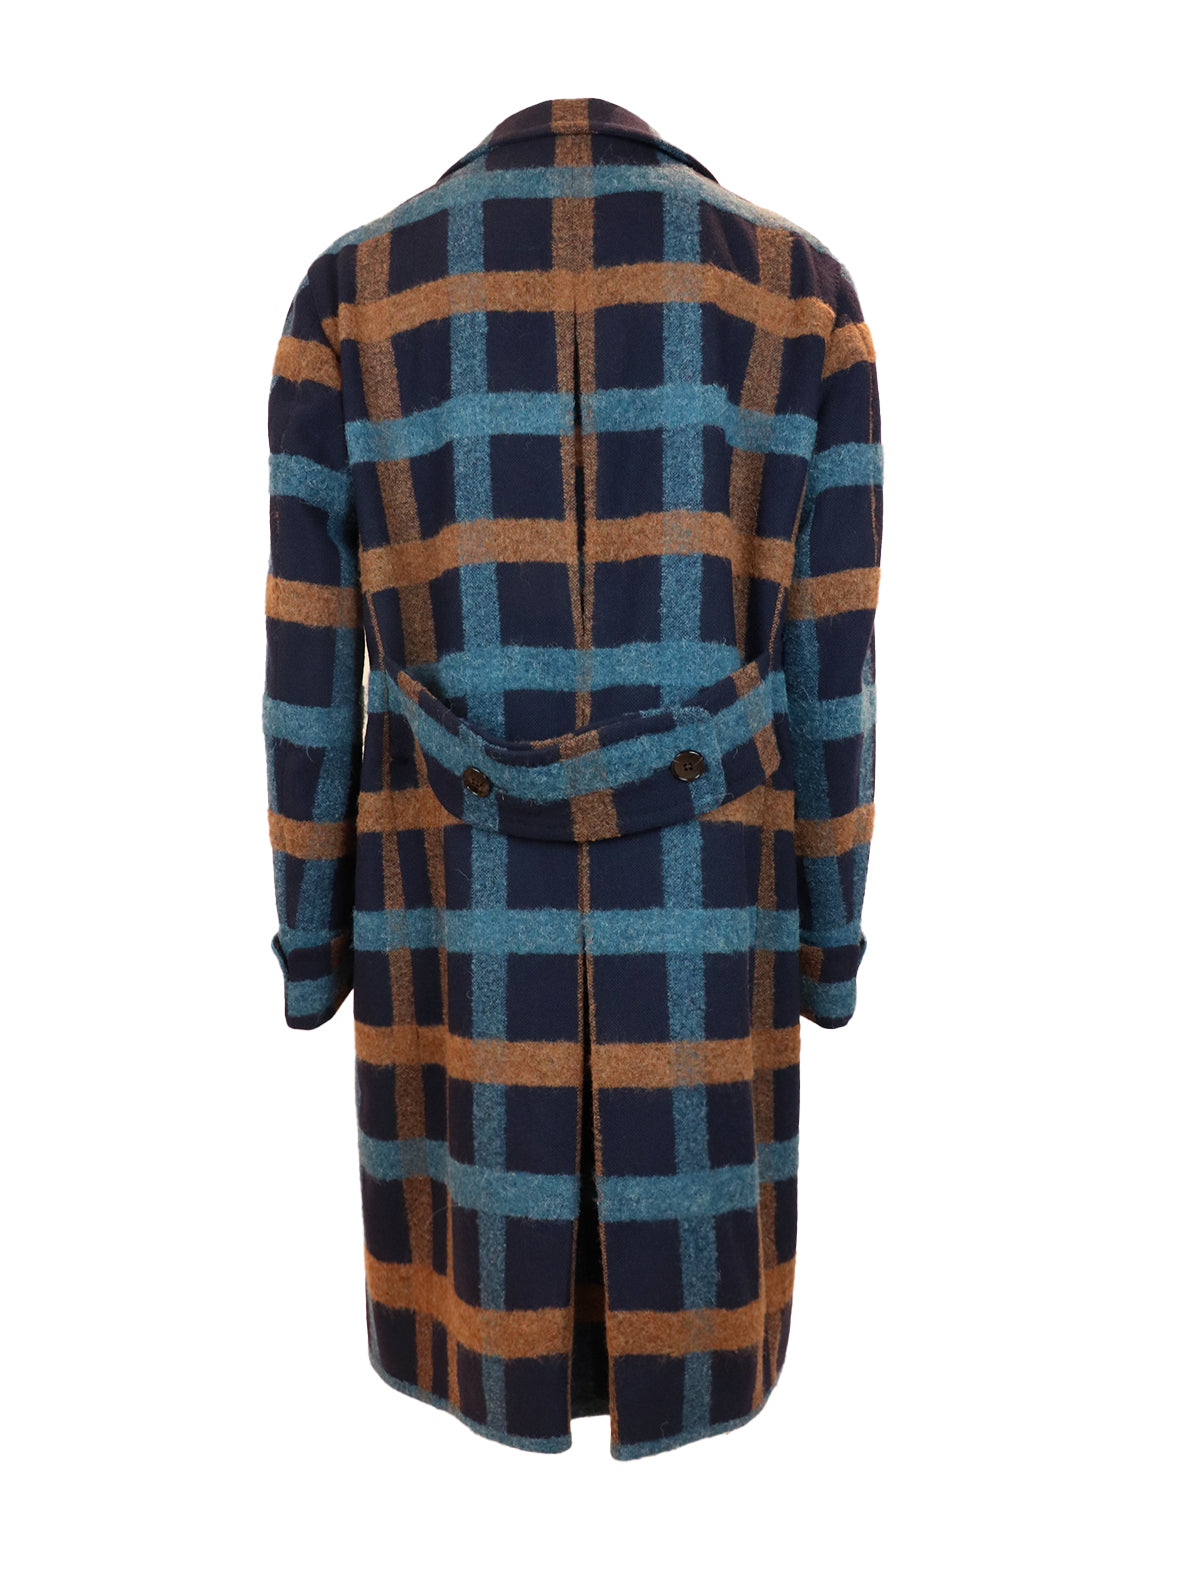 GABRIELE PASINI Ulster Checked Coat in Blue/Brown